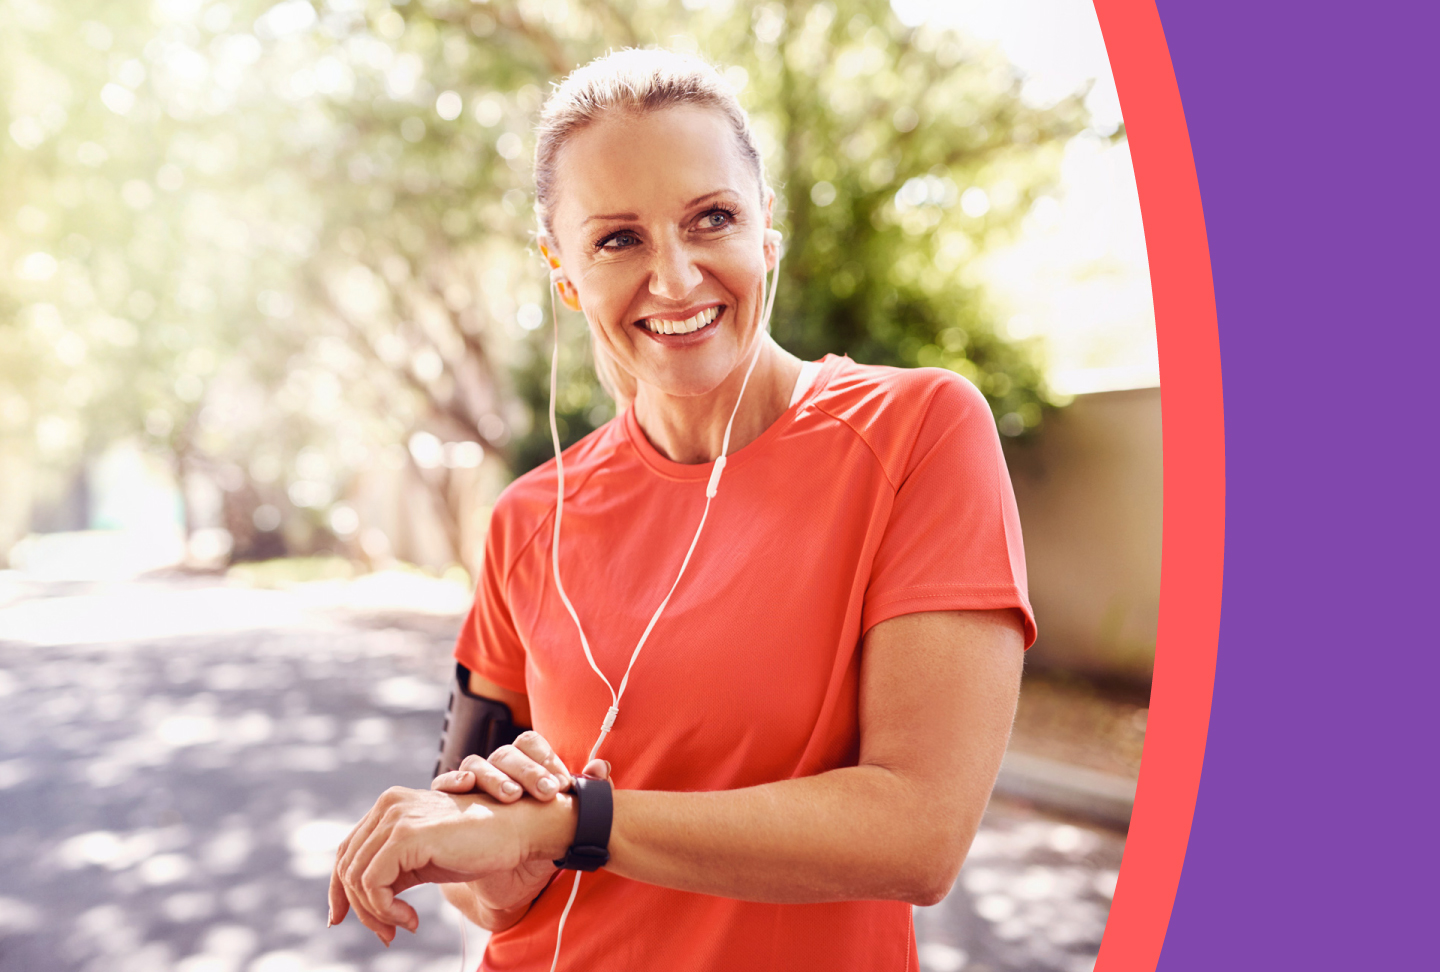 Smiling women checks her pulse during exercise. Make health your habit to prevent stroke.